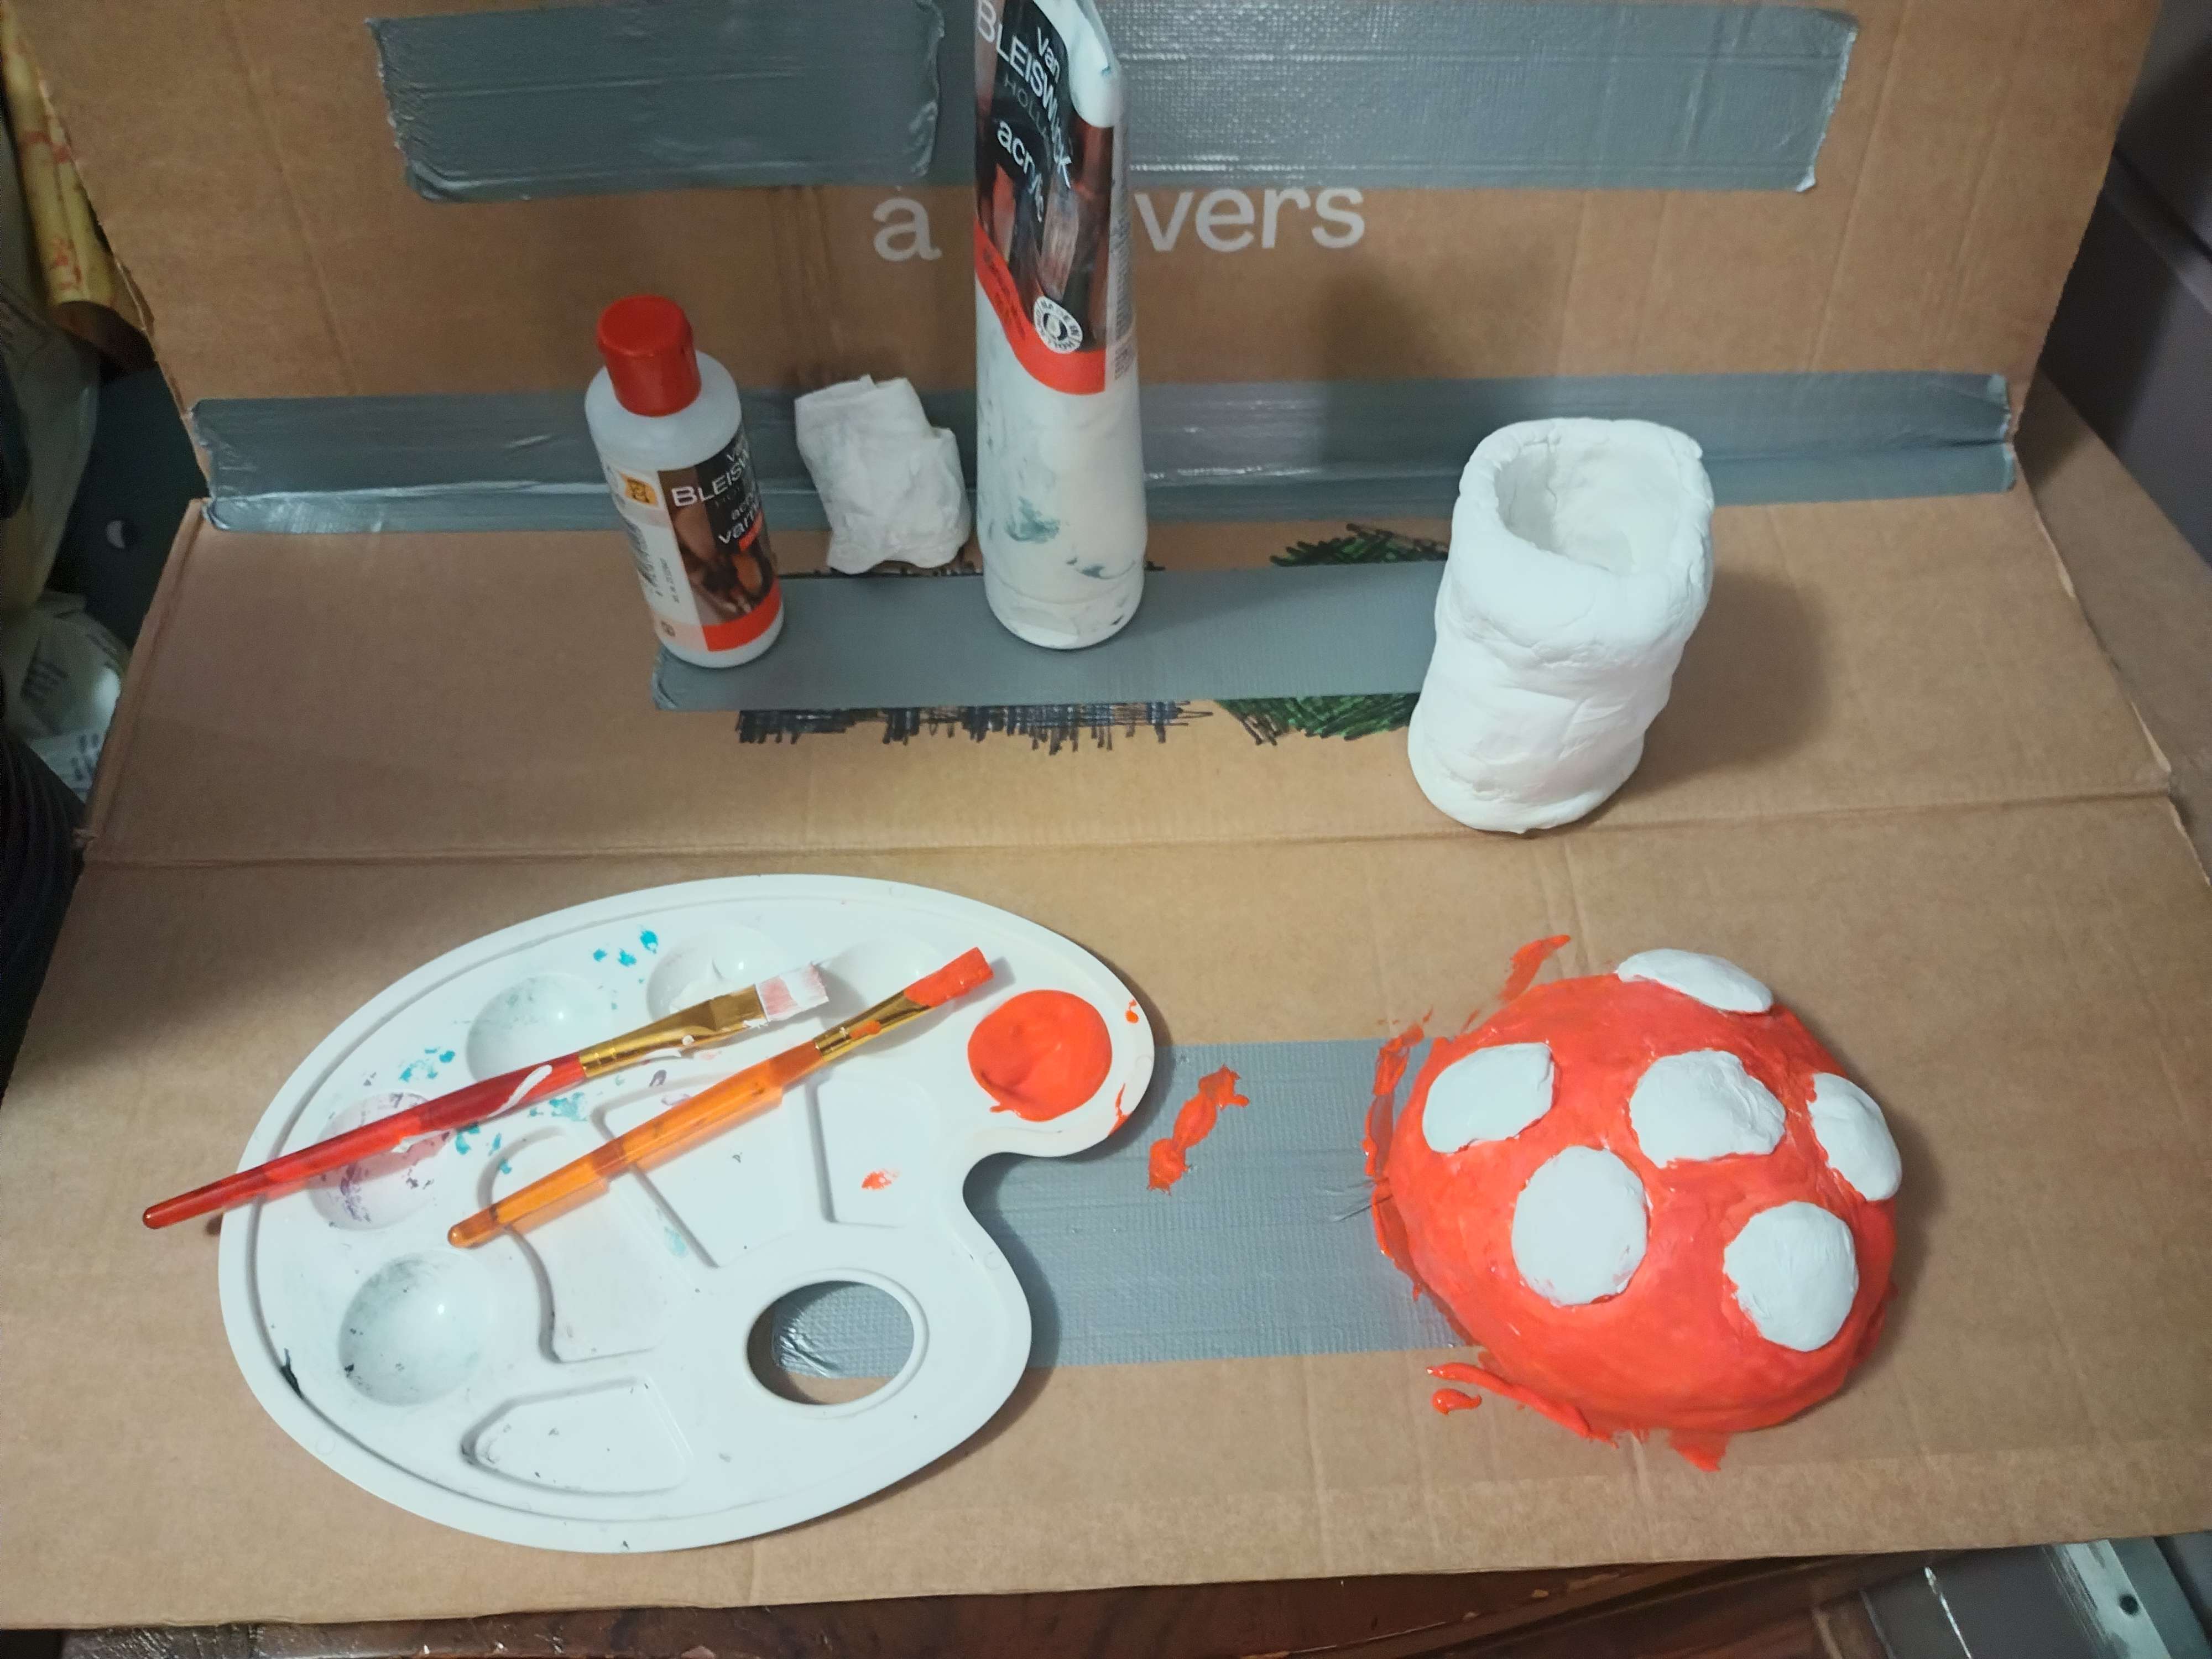 A picture of a painted sculpture and some painting supplies